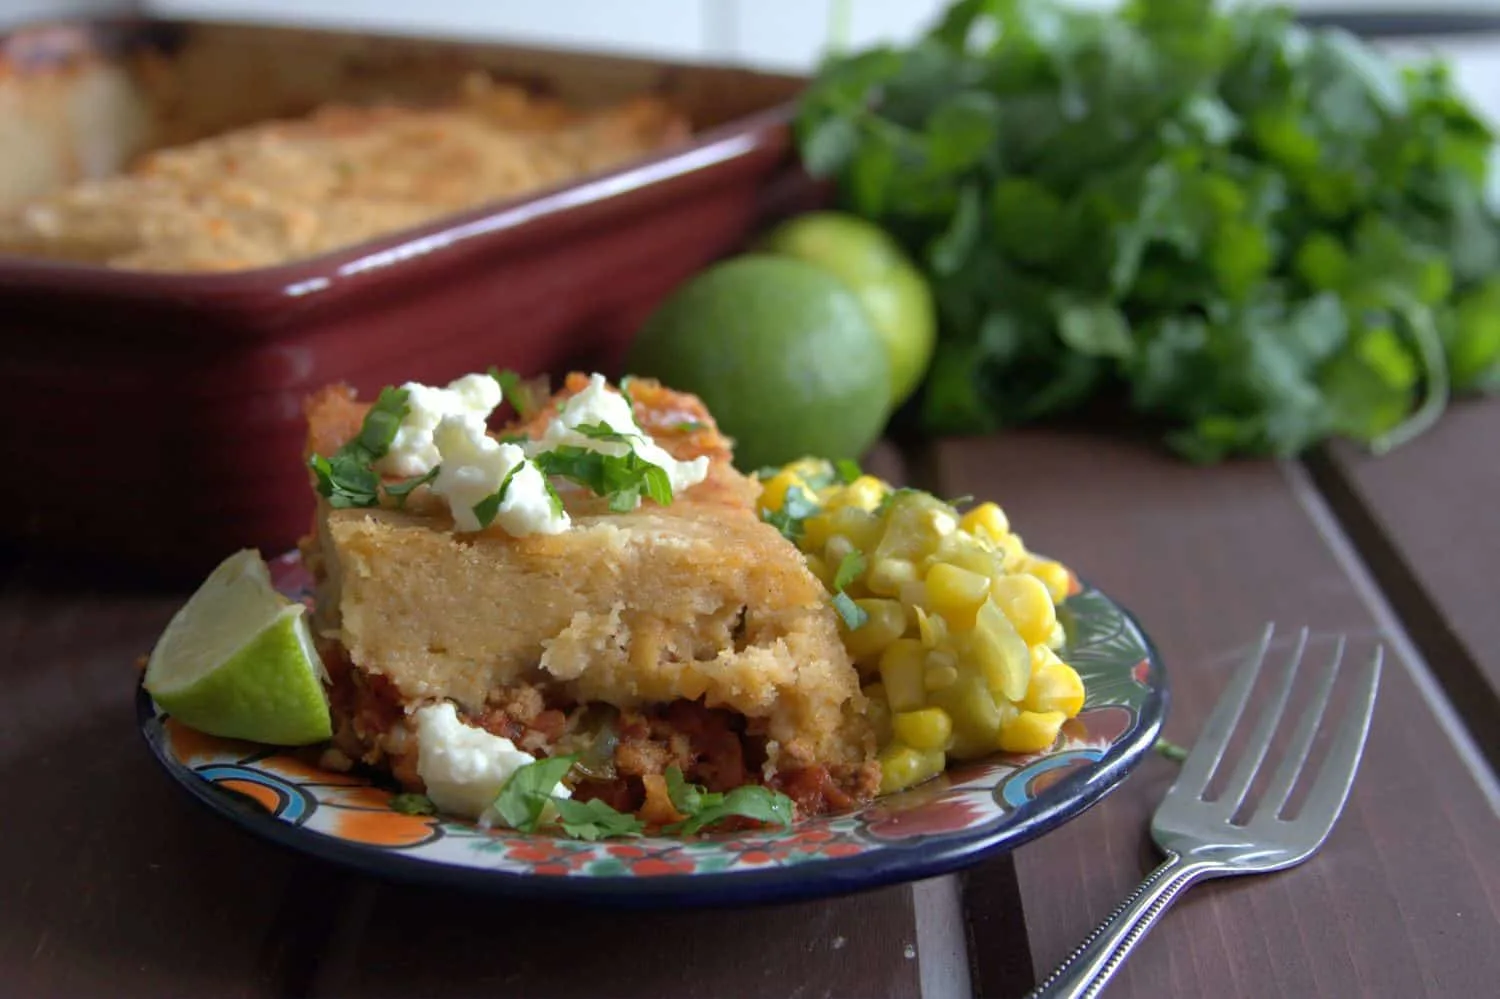 A delicious TexMex casserole, this Adobe Pie (also known as Tamale Pie) is an easier way to enjoy tamale flavors without all the rolling. It's freezer friendly too!